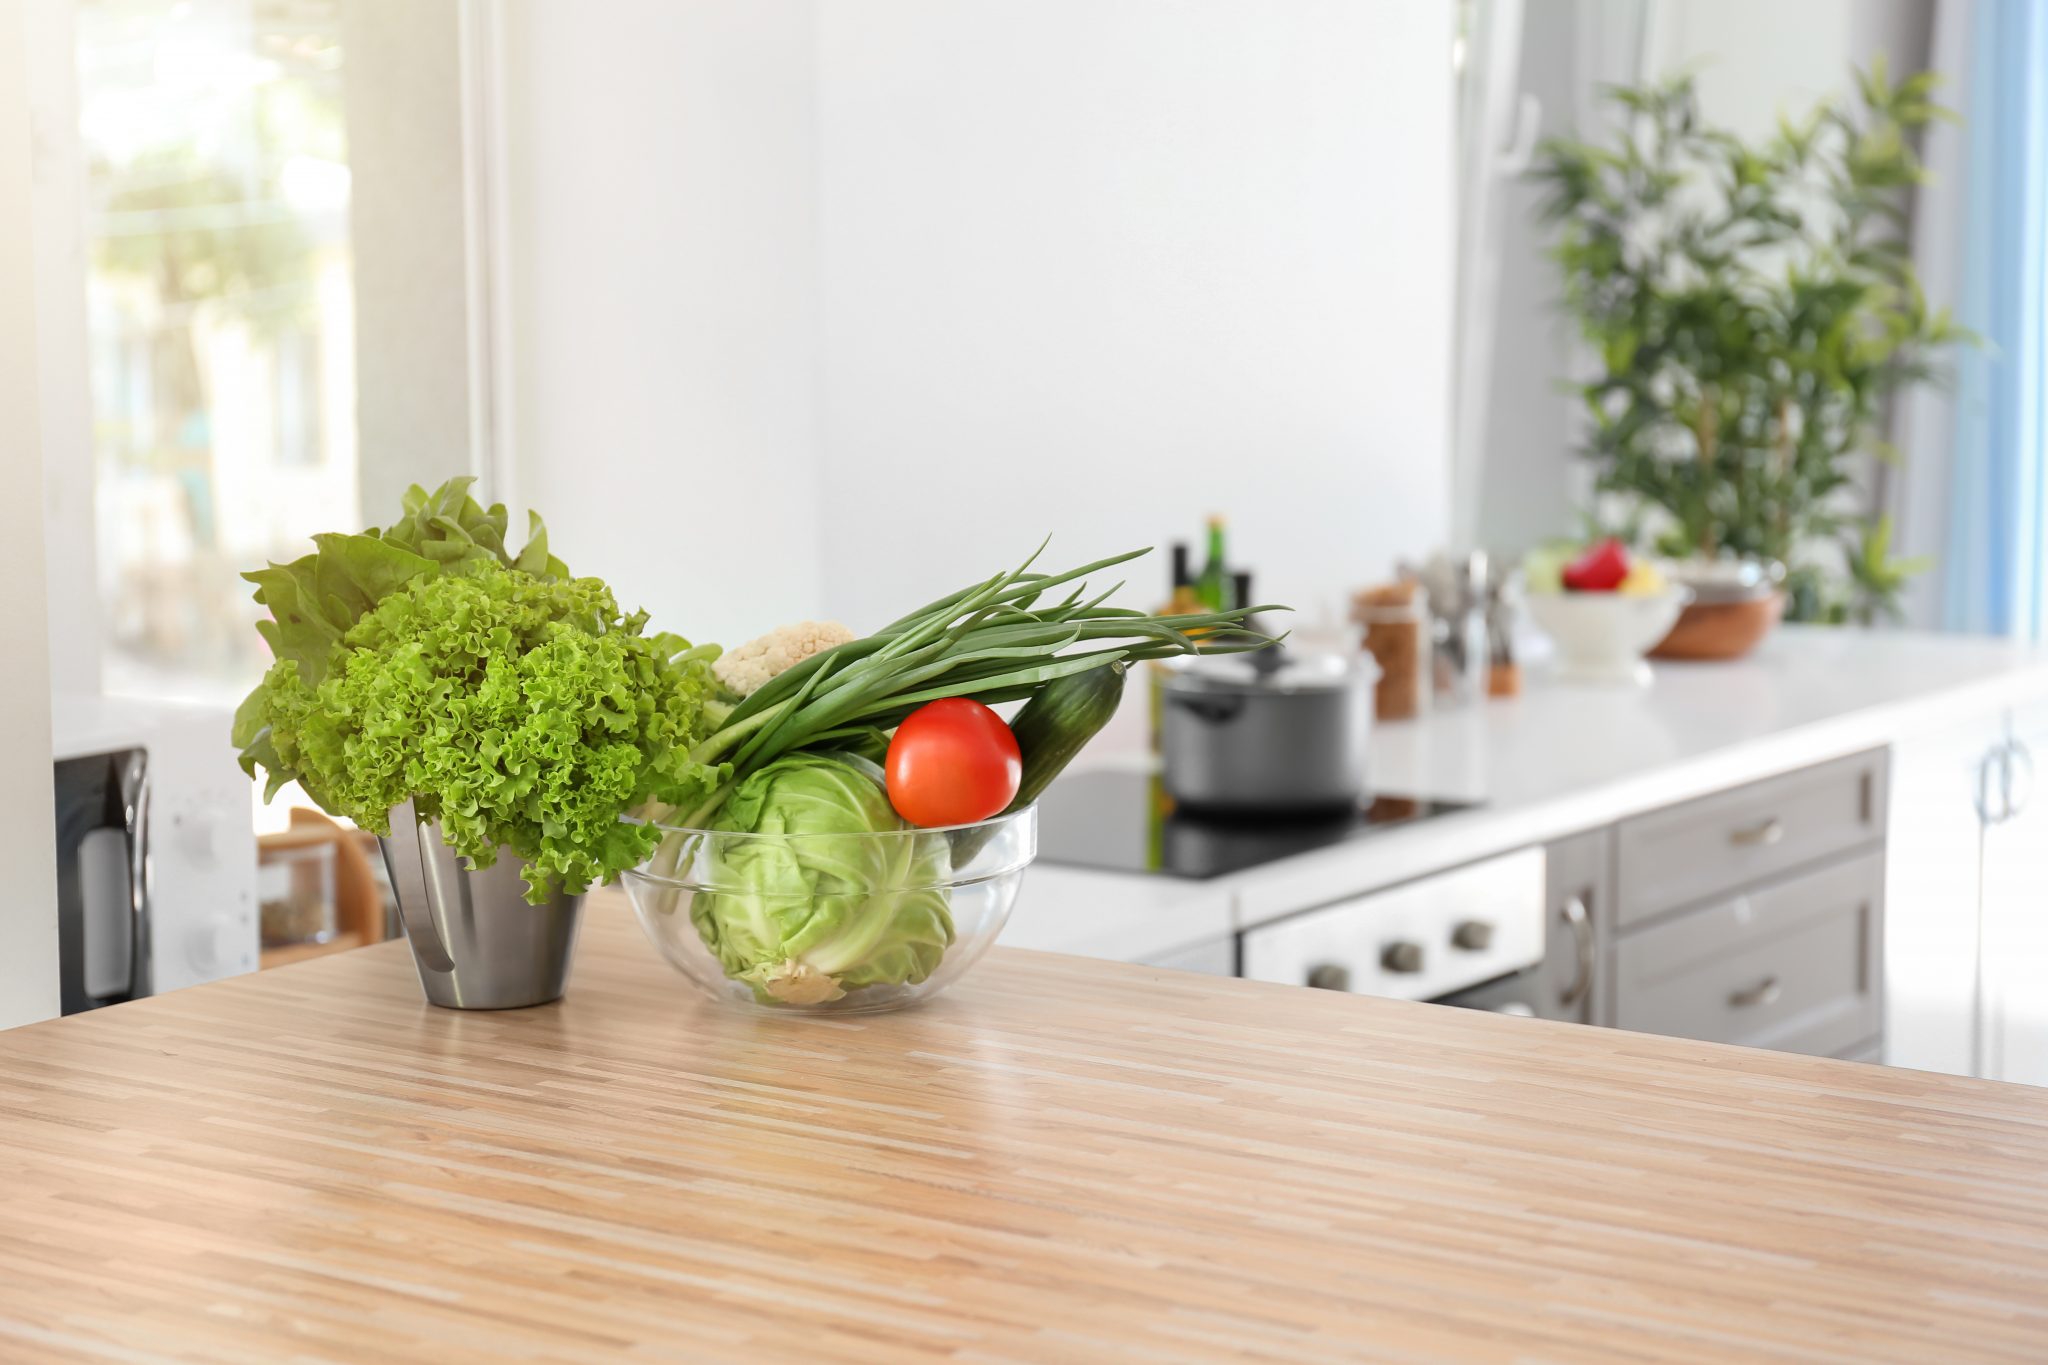 Set Yourself Up For Nutrition Success With a Kitchen Refresh - Tony ...